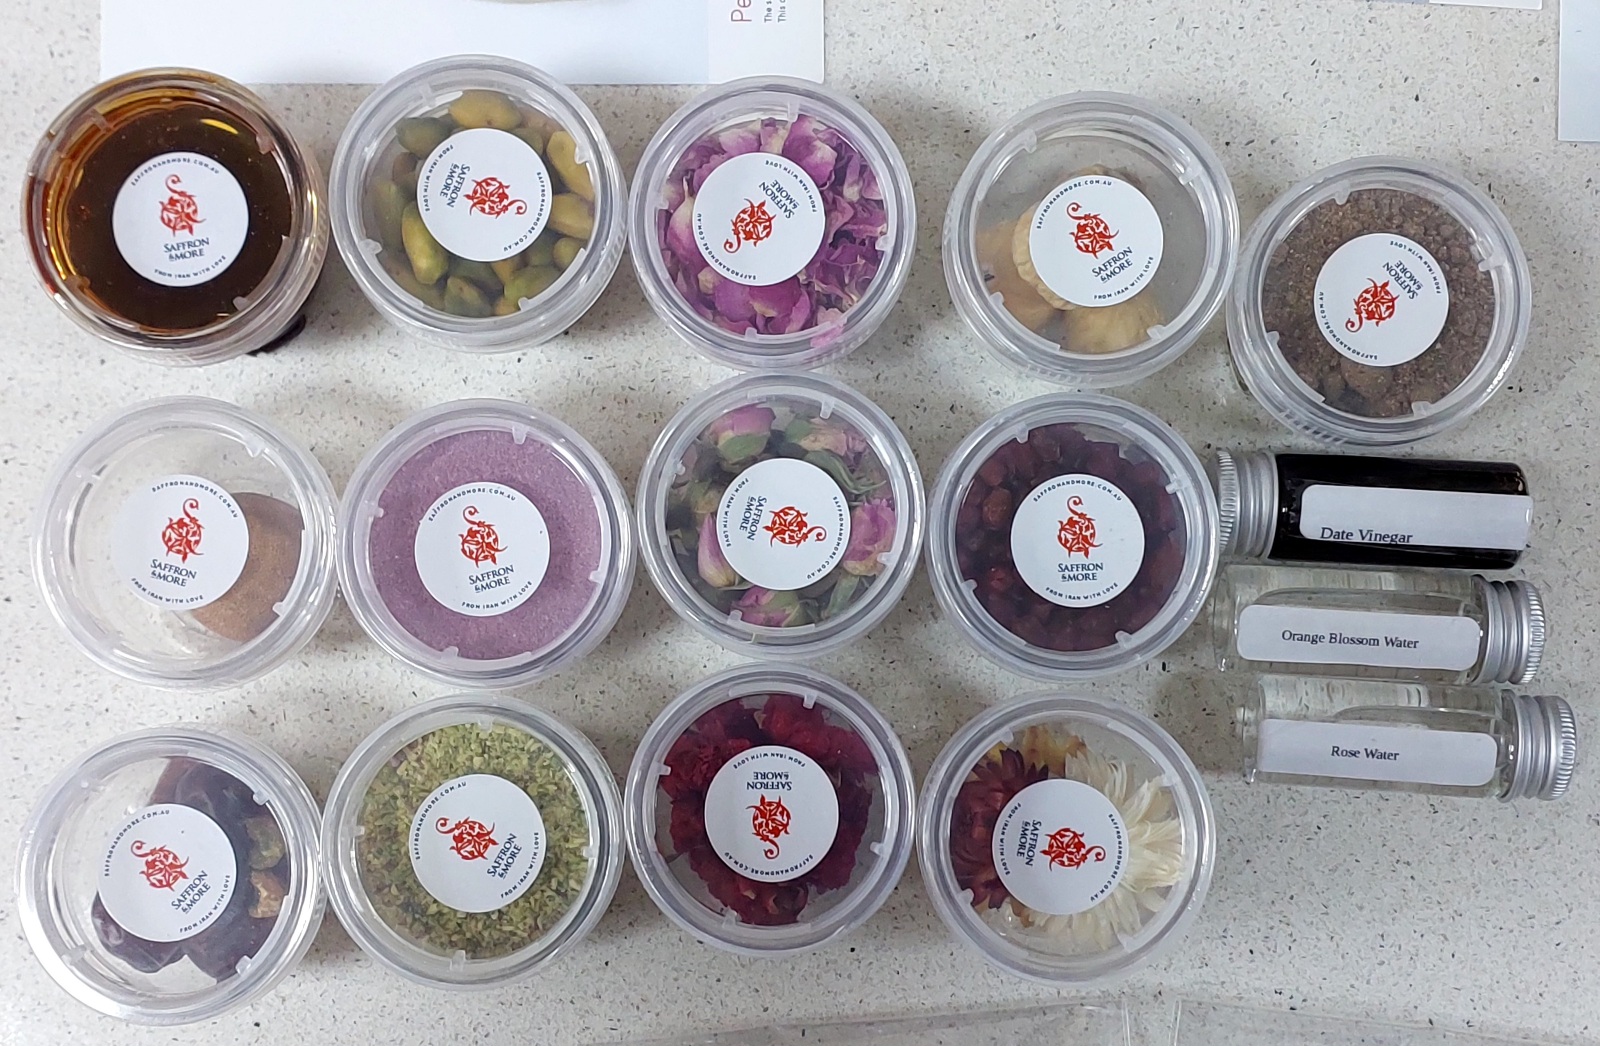 The 13 Sample containers